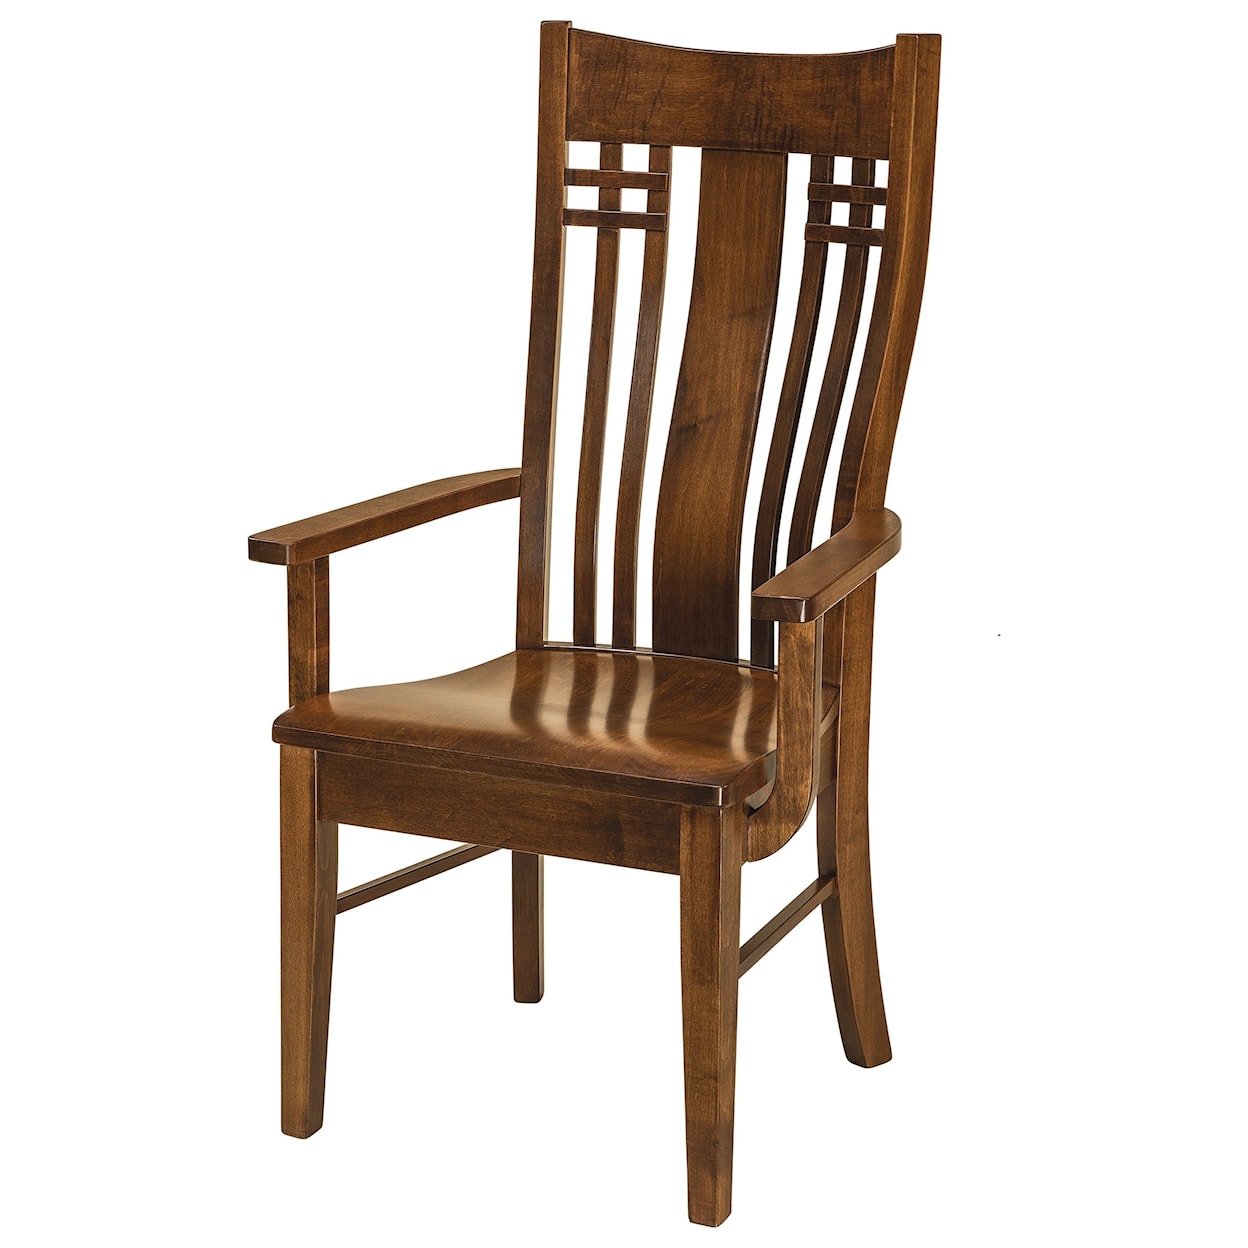 F&N Woodworking Bennet Arm Chair - Fabric Seat